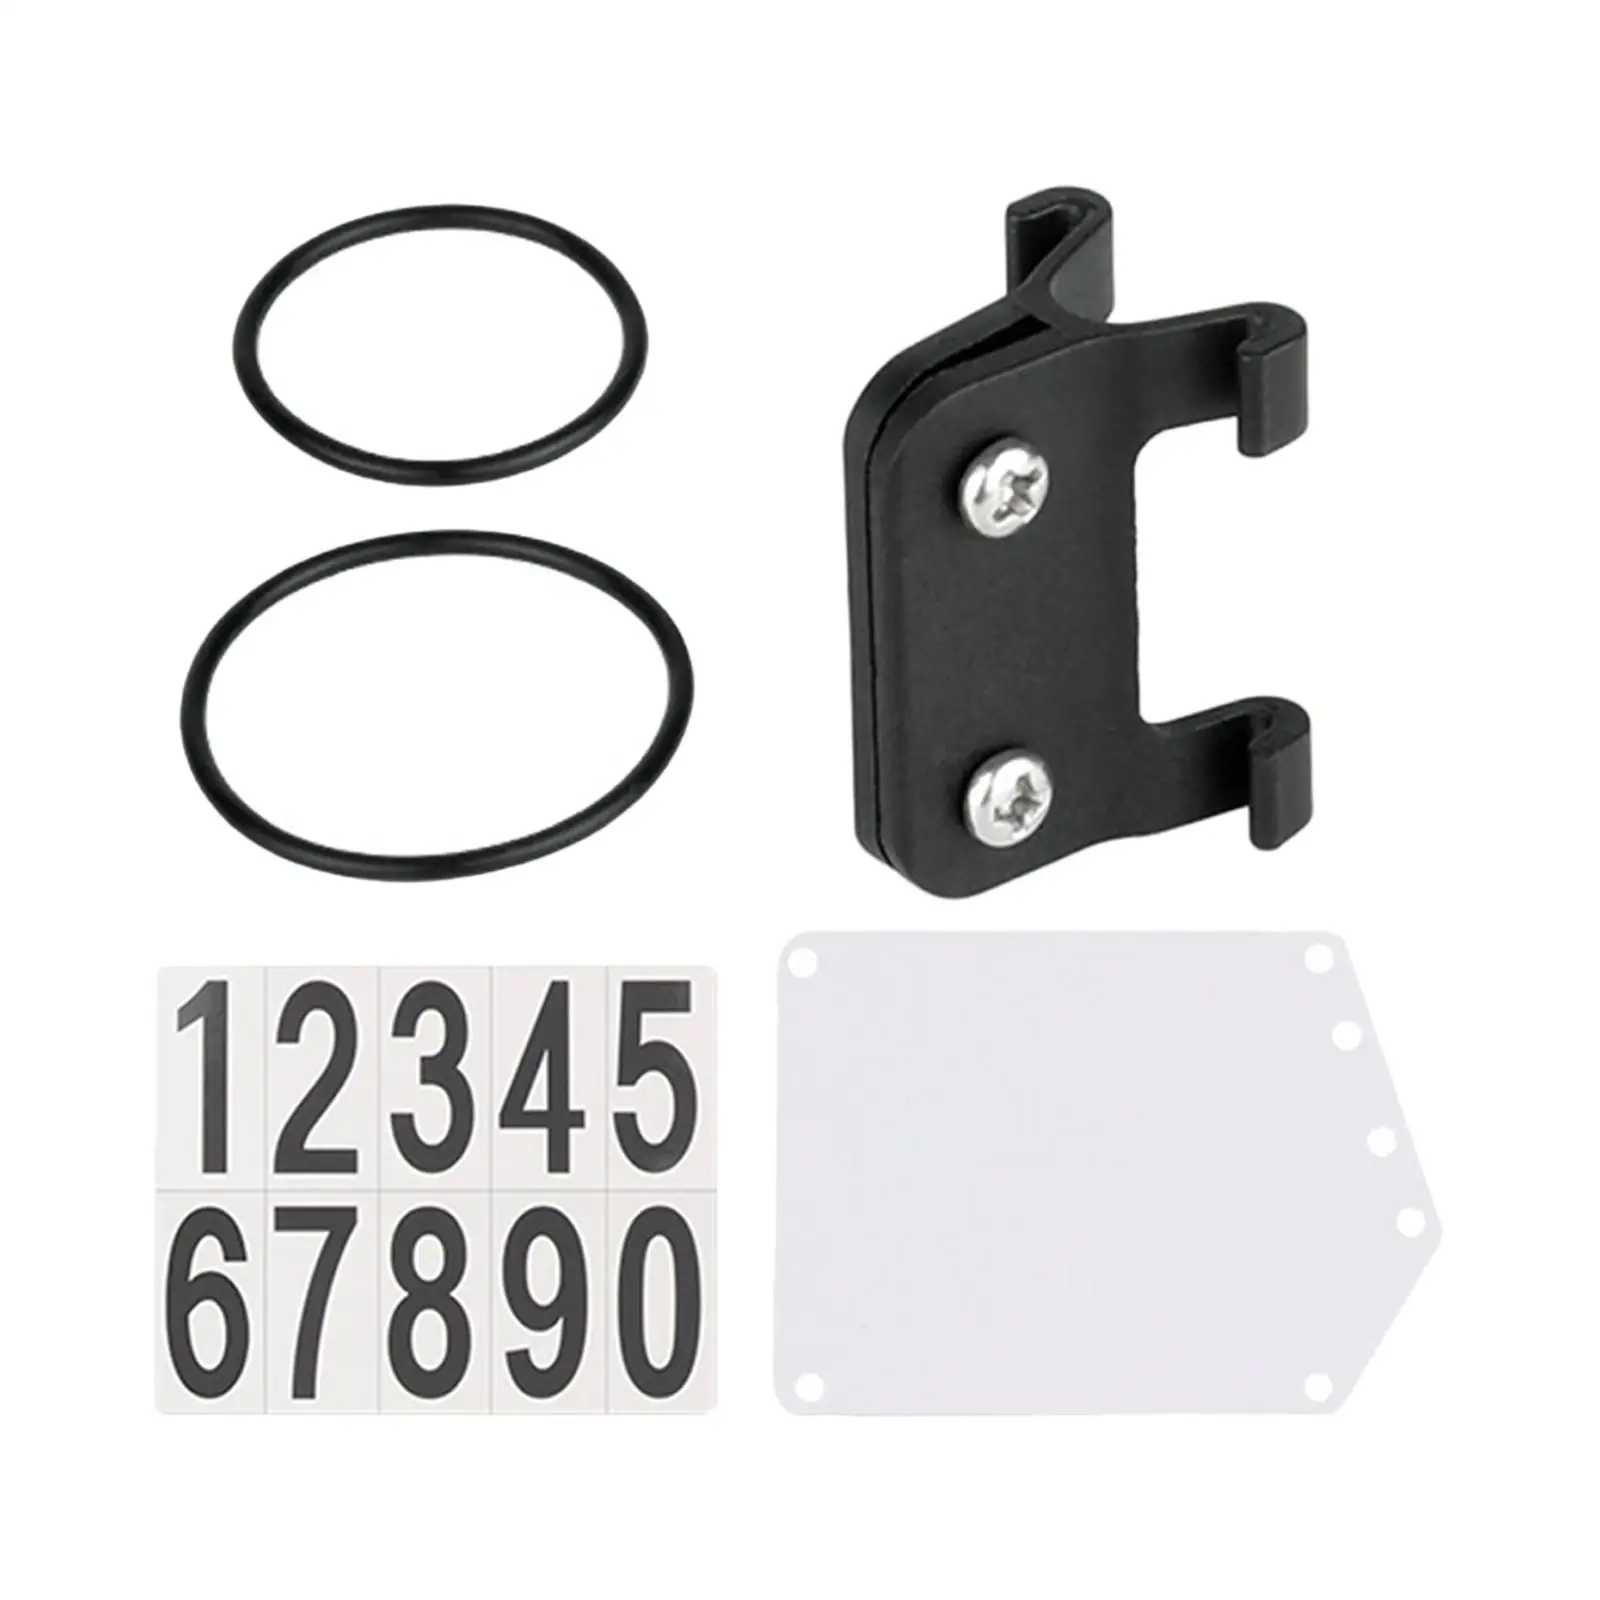 Racing Number Plate Holder Race Cards Bracket with Bands Quick Release Parts Fixed for Cycling Triathlon Accessories Road Bike